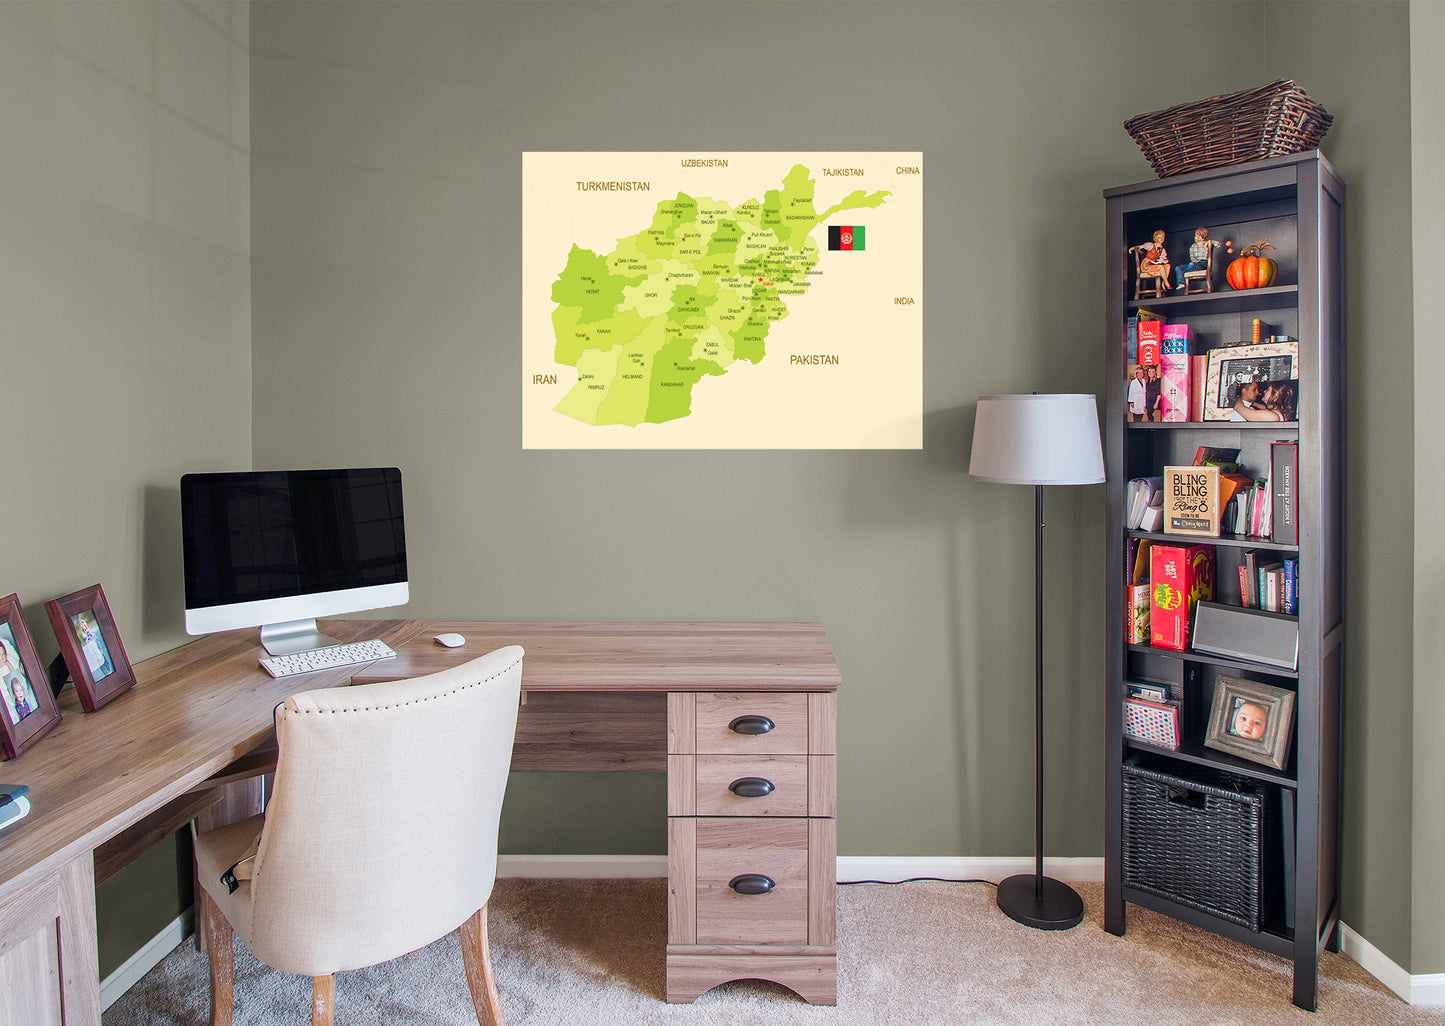 Maps of Asia: Afghanistan Mural        -   Removable Wall   Adhesive Decal